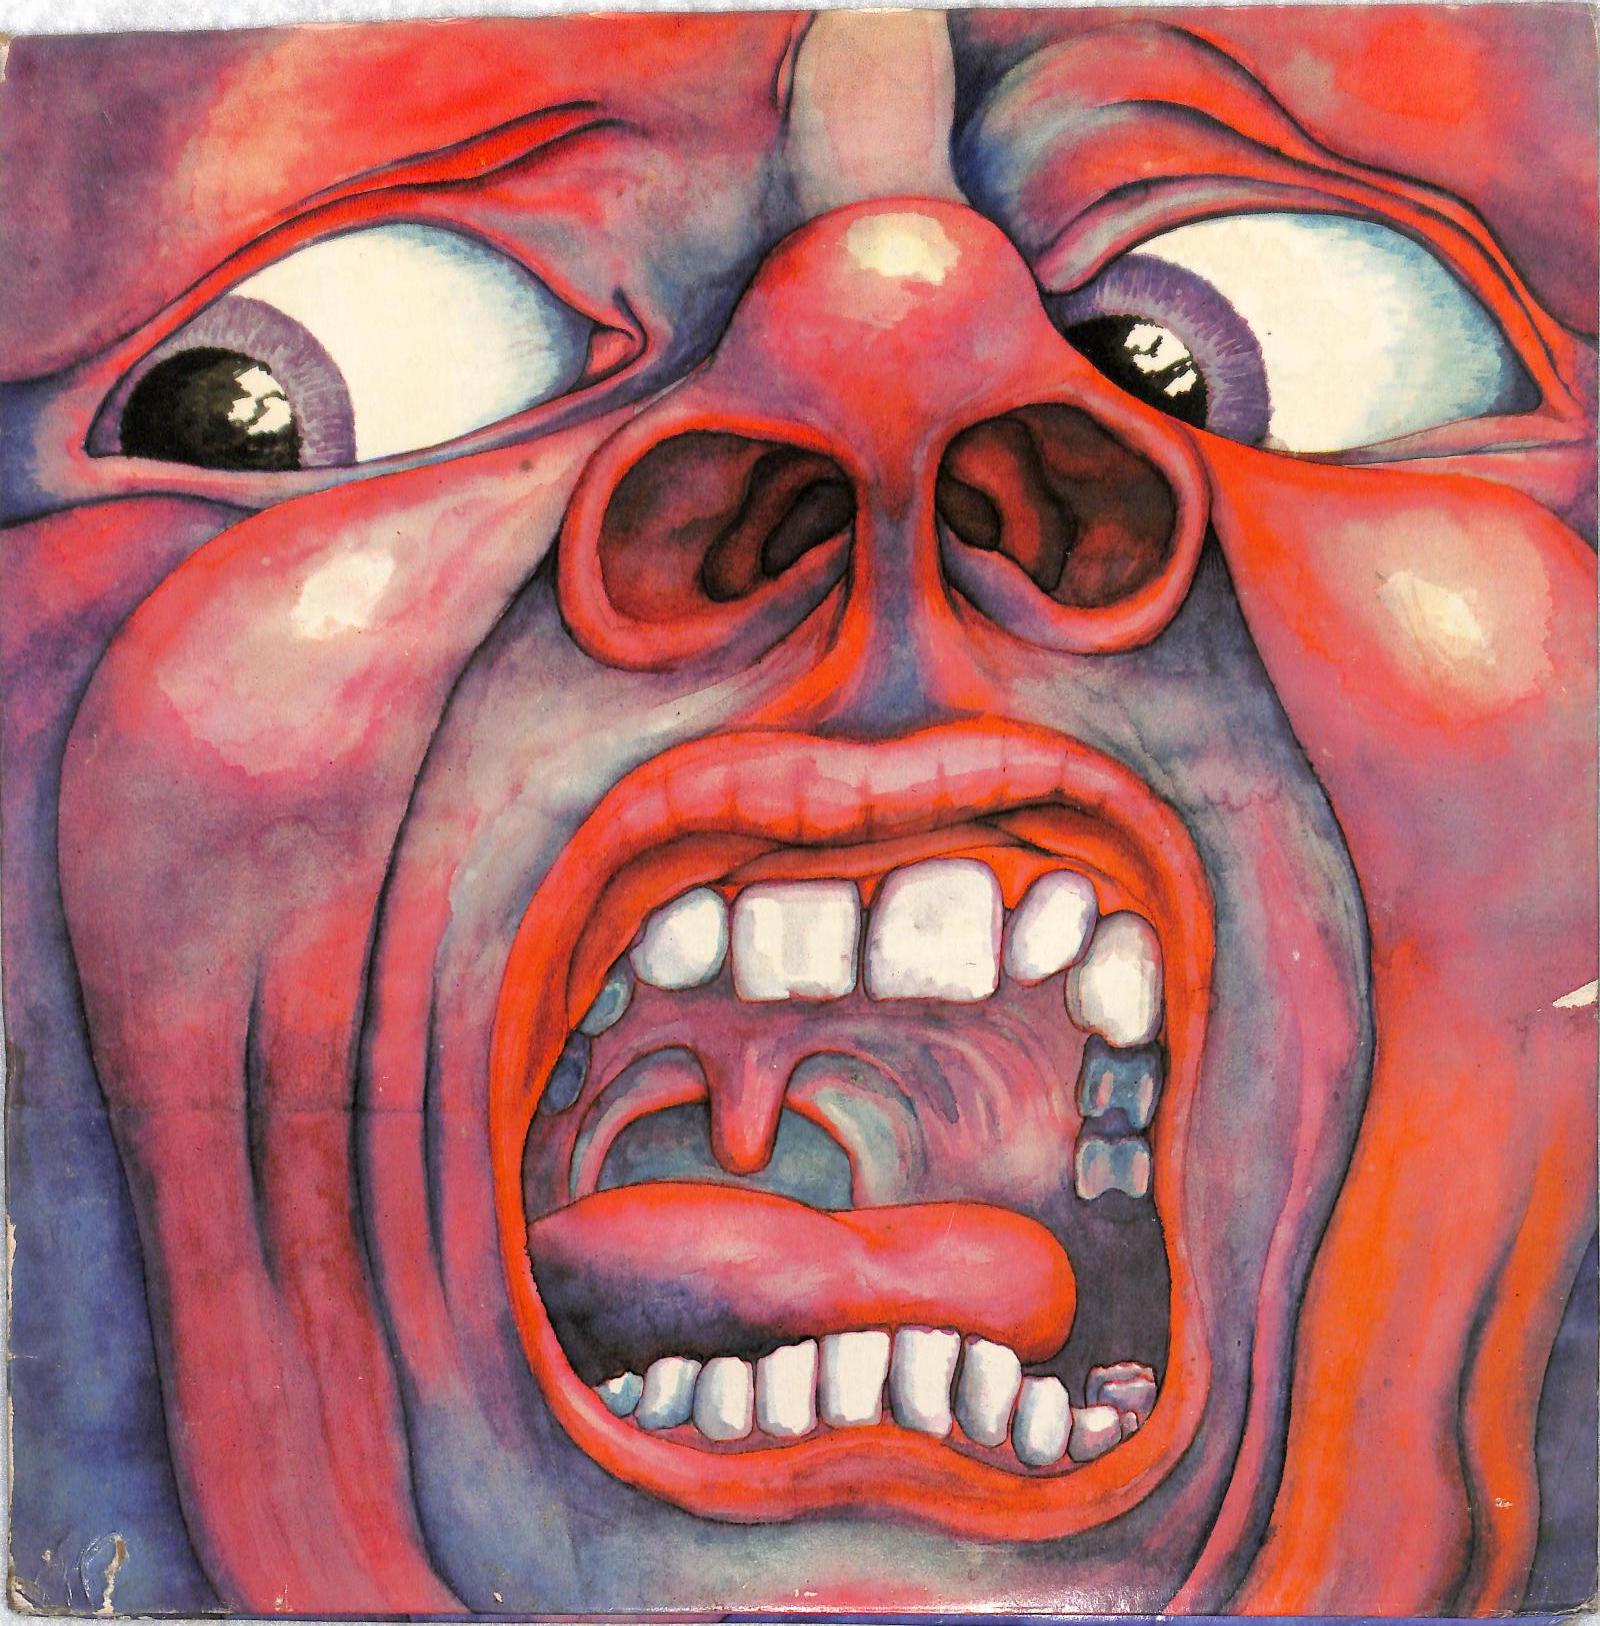 KING CRIMSON - In The Court Of The Crimson King (An Observation By King Crimson)